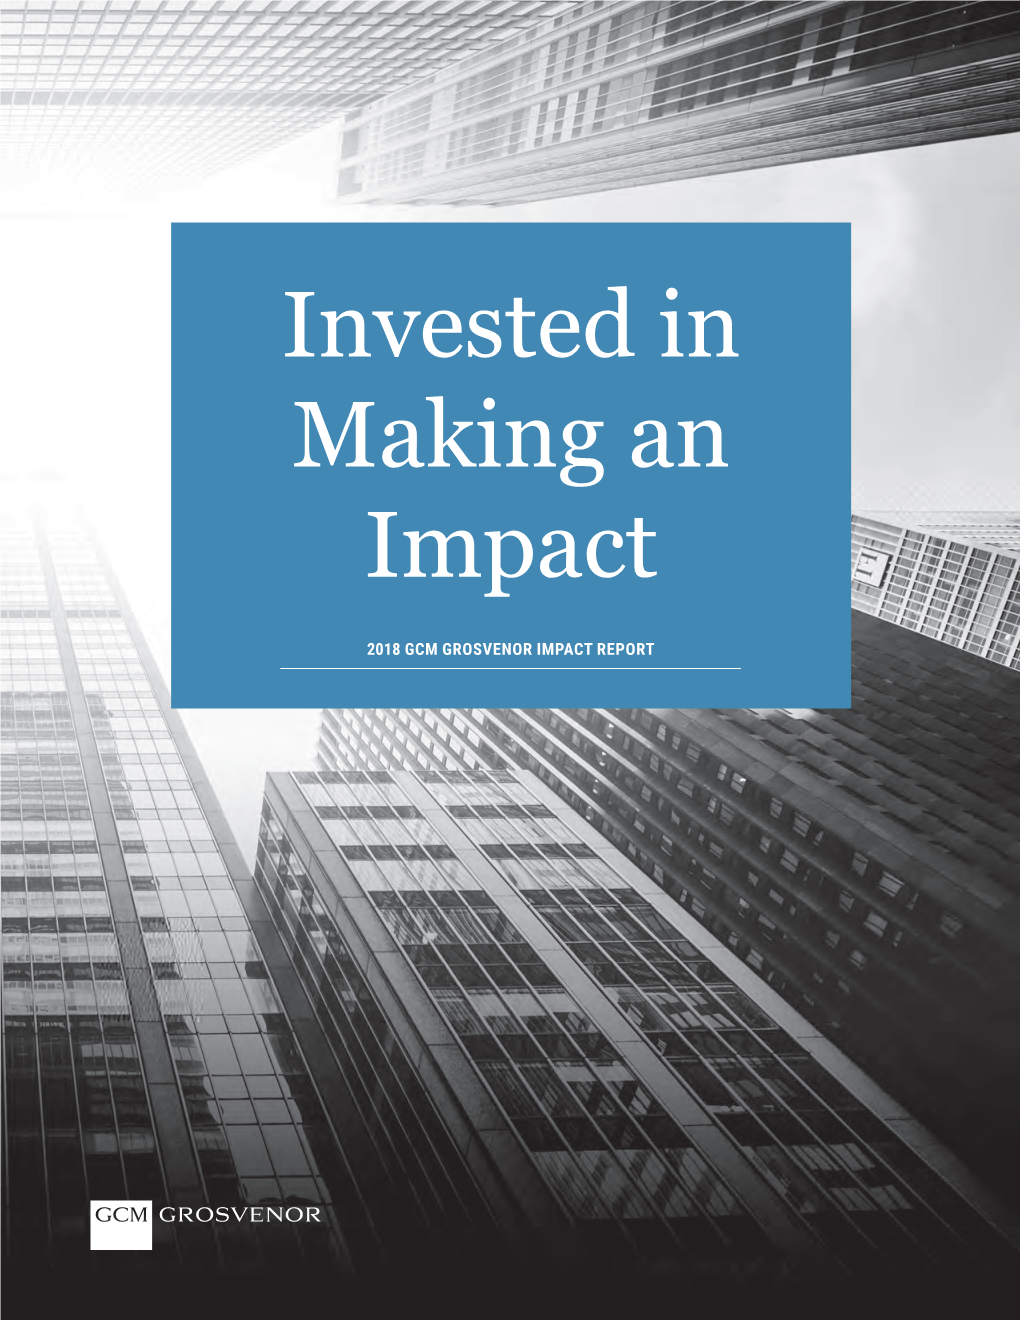 At GCM Grosvenor, We Are Invested in Making an Impact